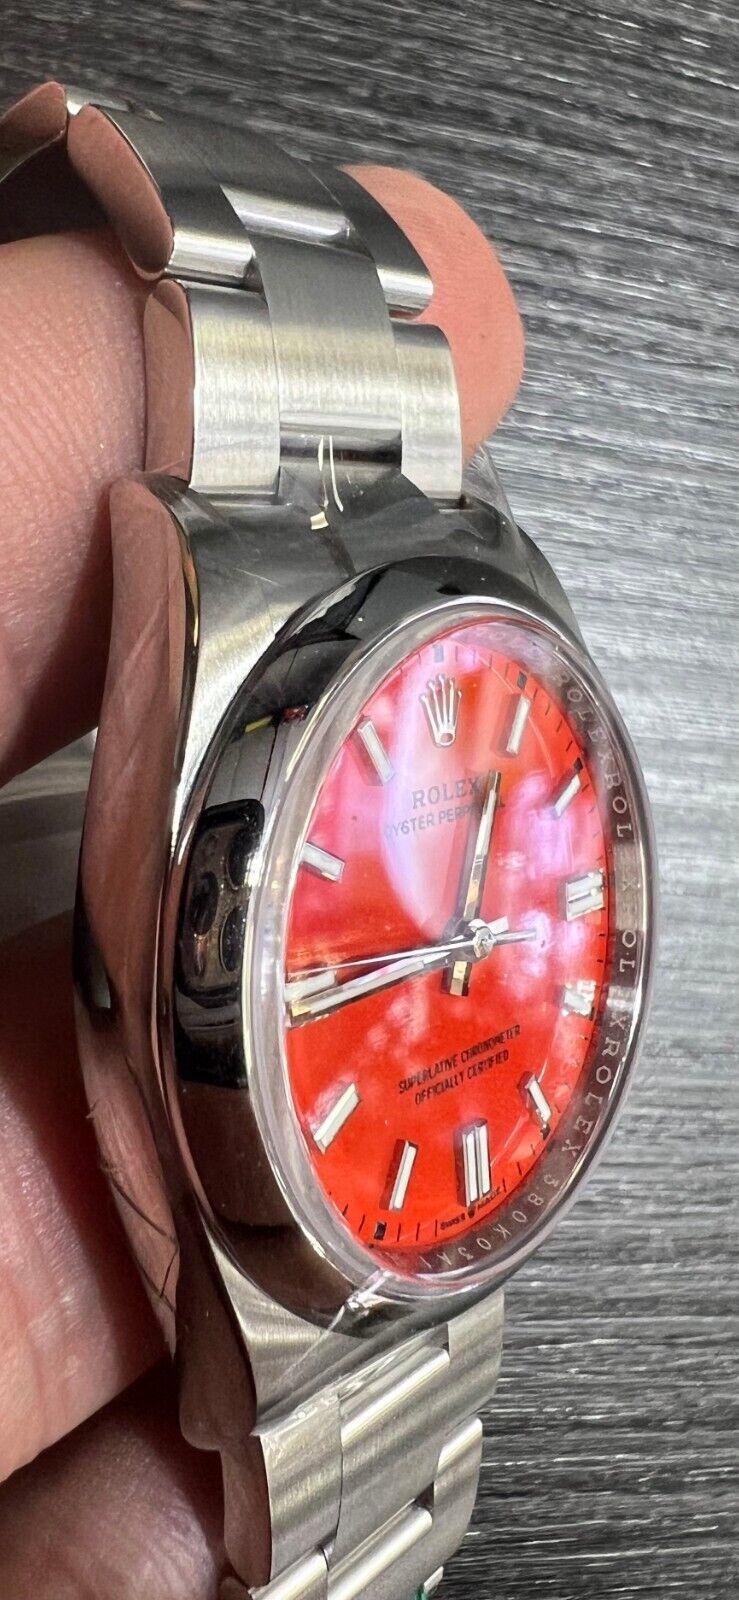 Rolex Oyster Perpetual 126000 Red 36mm Unisex Watch